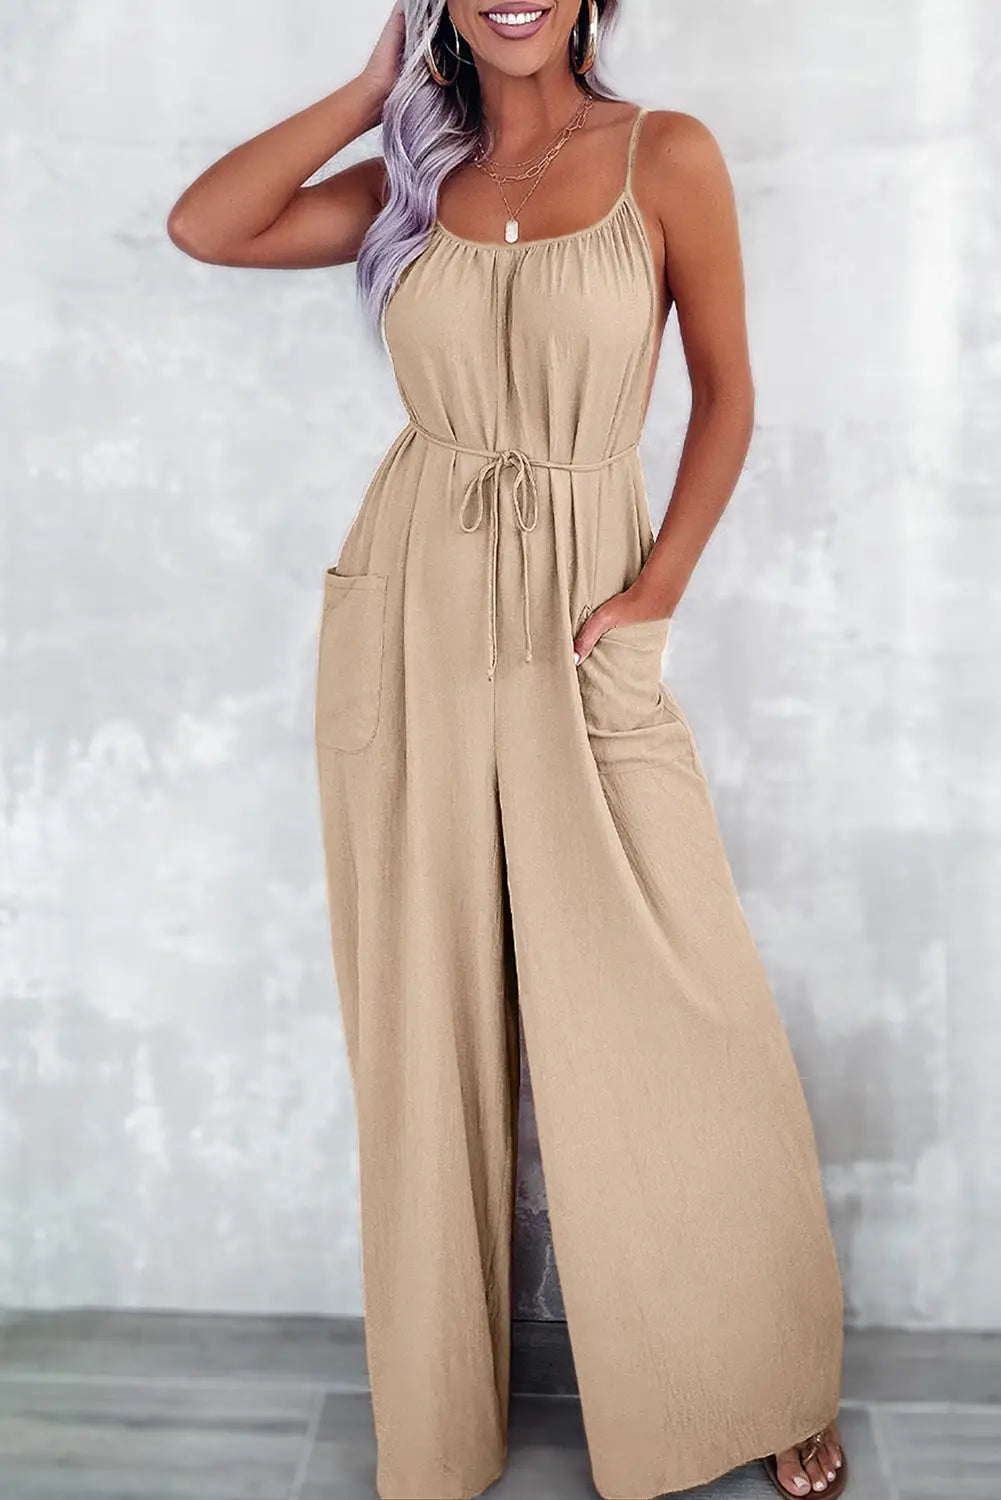 Riviera wide leg jumpsuit with pockets - apricot / s / 100% polyester - bottoms/jumpsuits & rompers